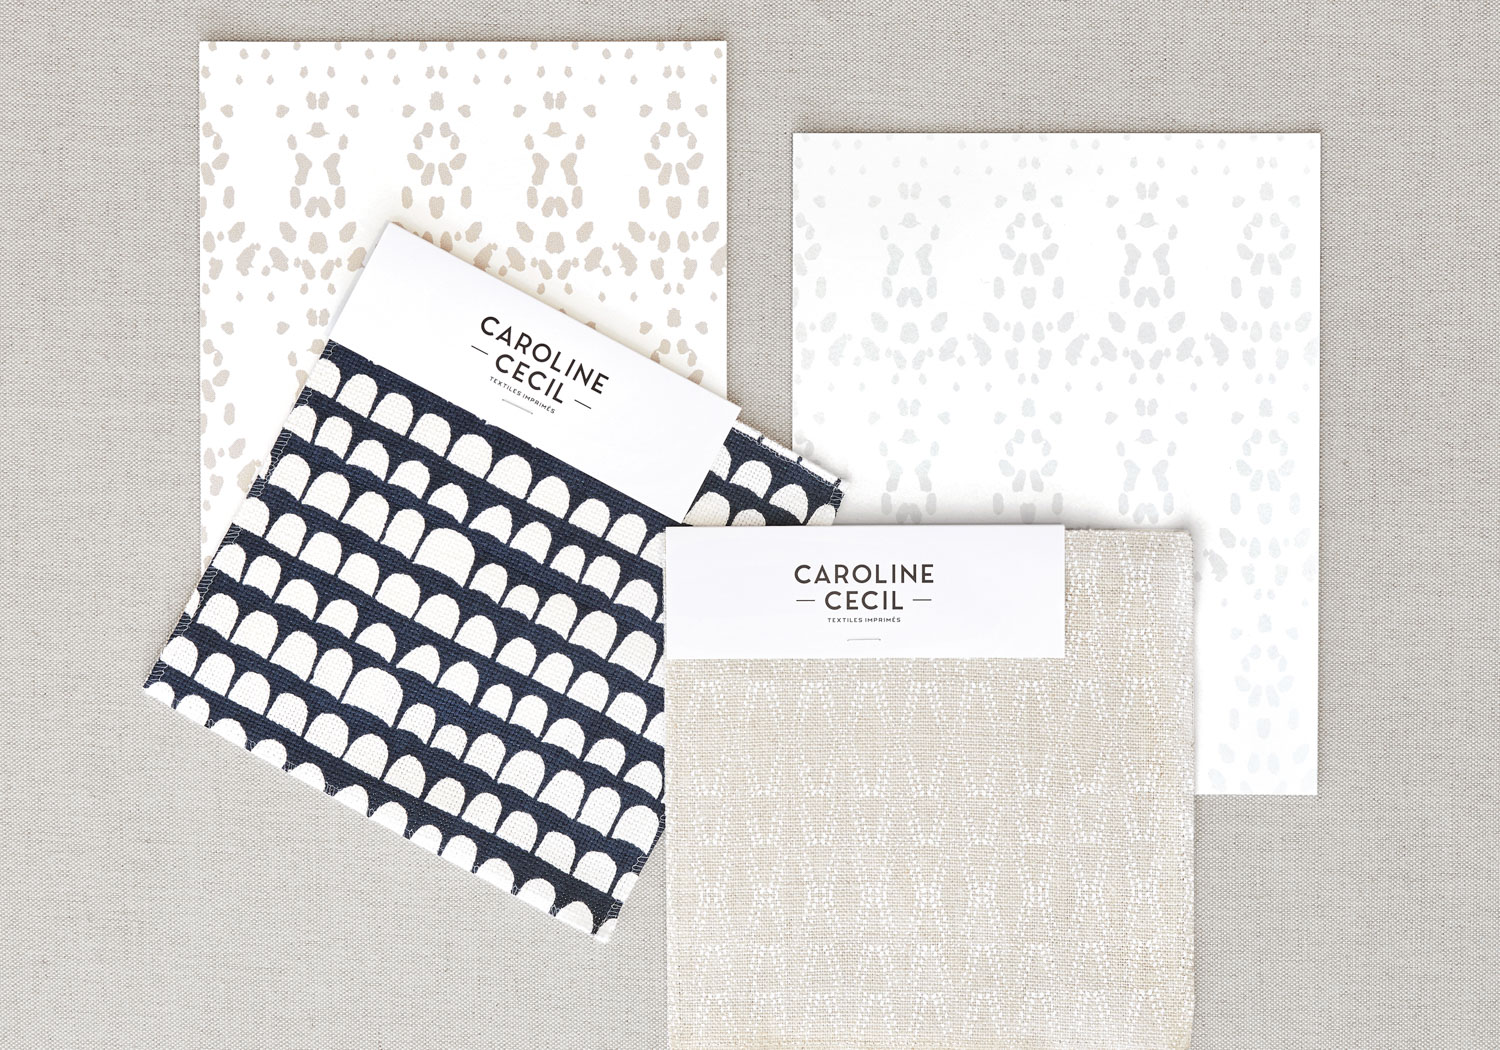 Four white, black and neutral patterned textile swatches.